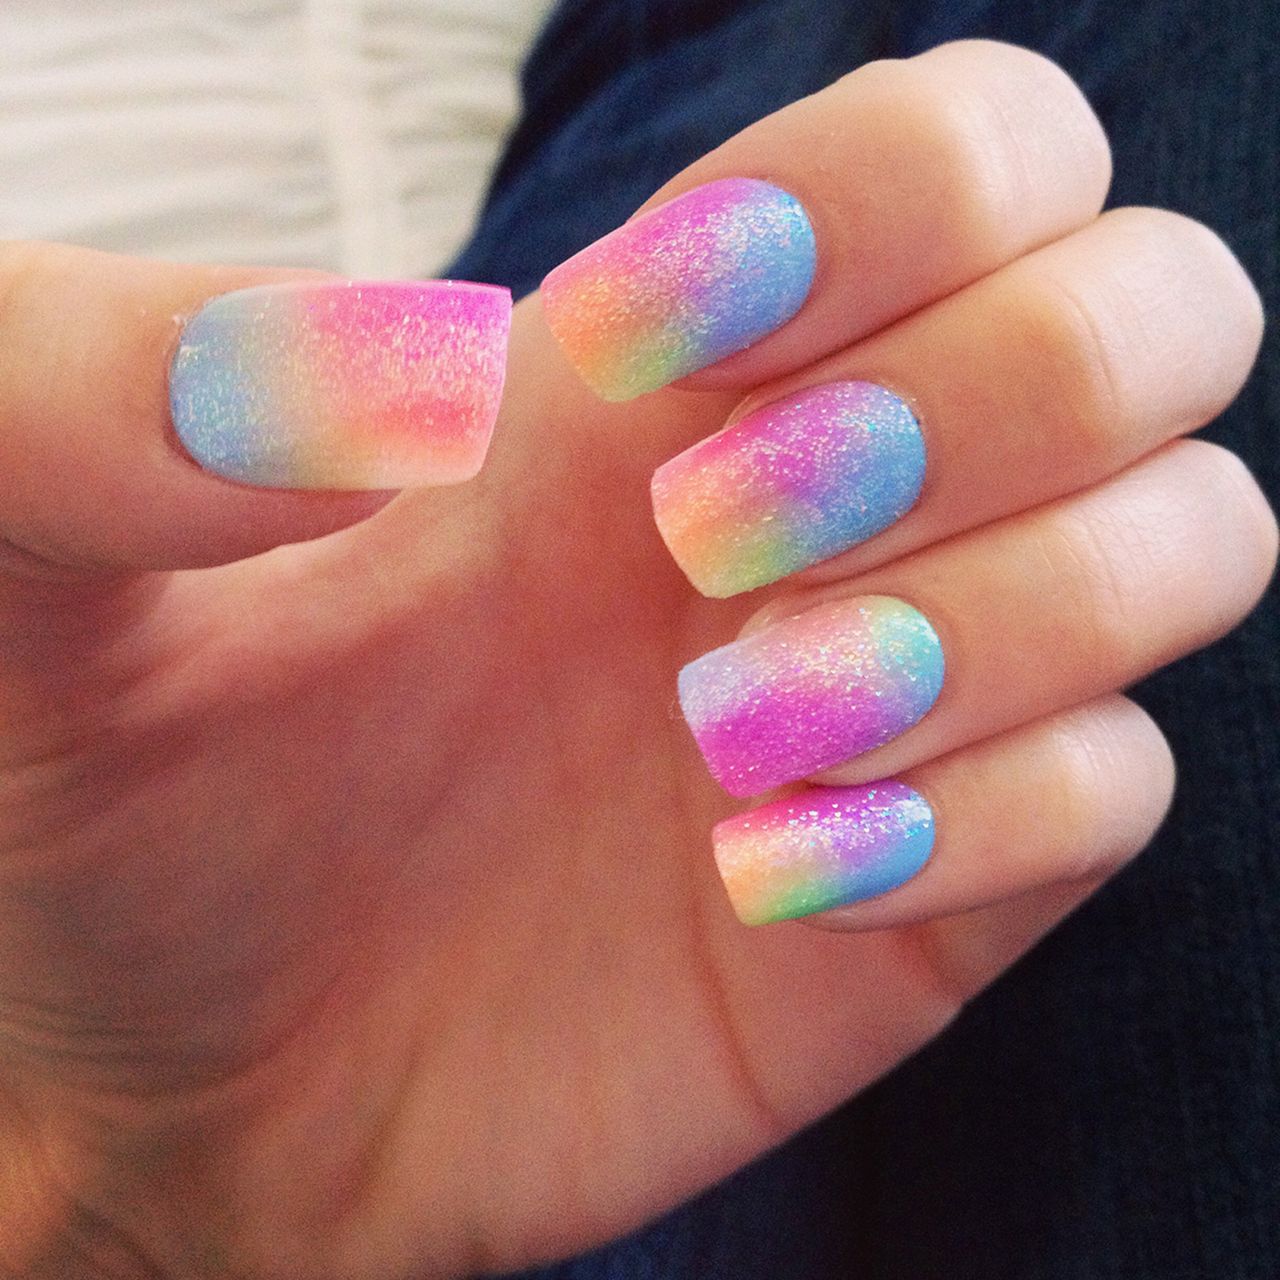 Ombre nail art inspirations from favim